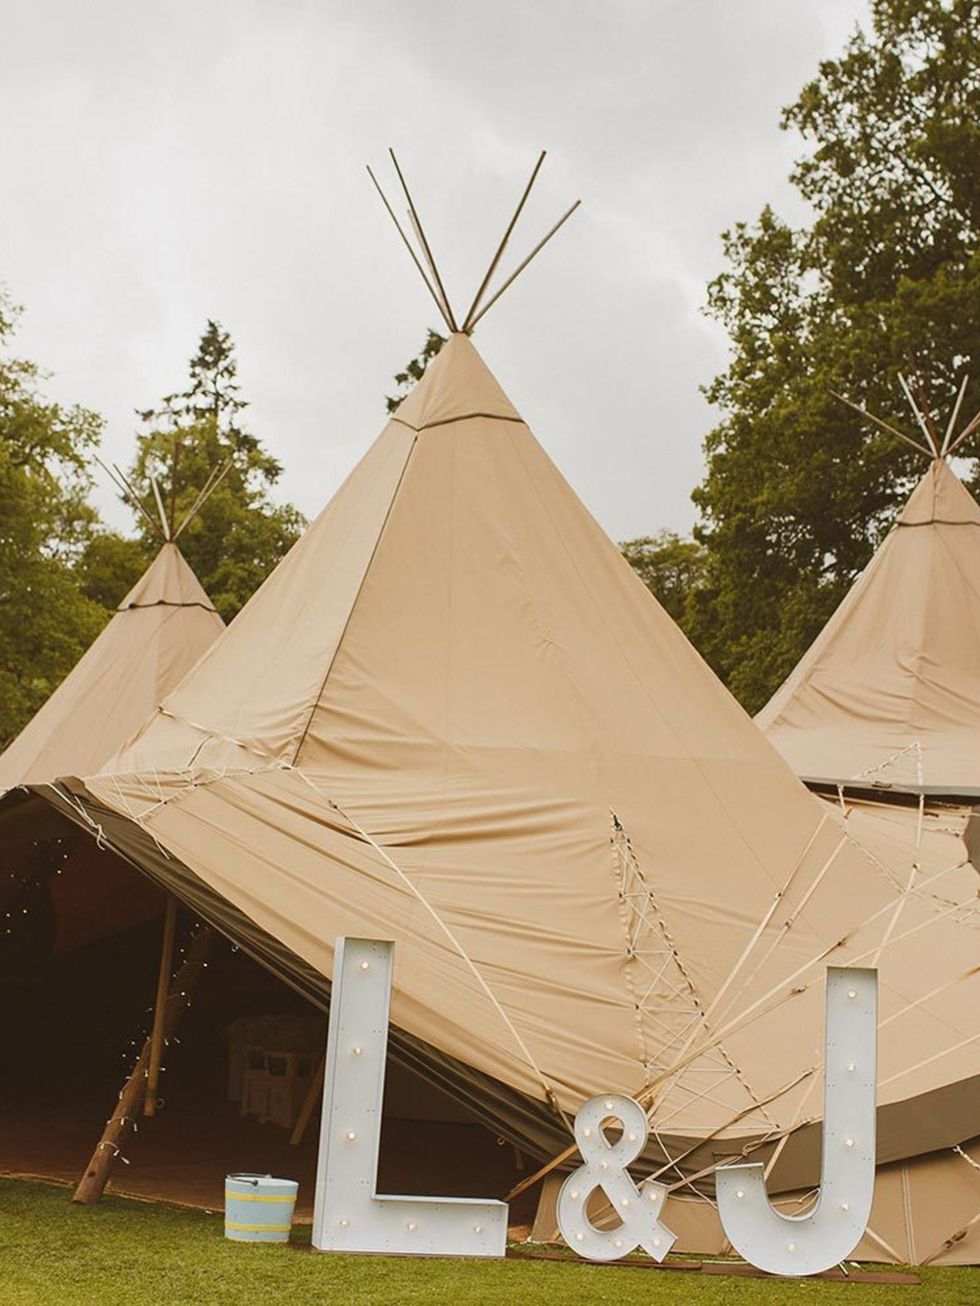 We loved the idea of having the party in a giant tipi as it blended in with the outdoorsy, countryside, festival feel. We used Papakata and they were absolutely fantastic to work with.